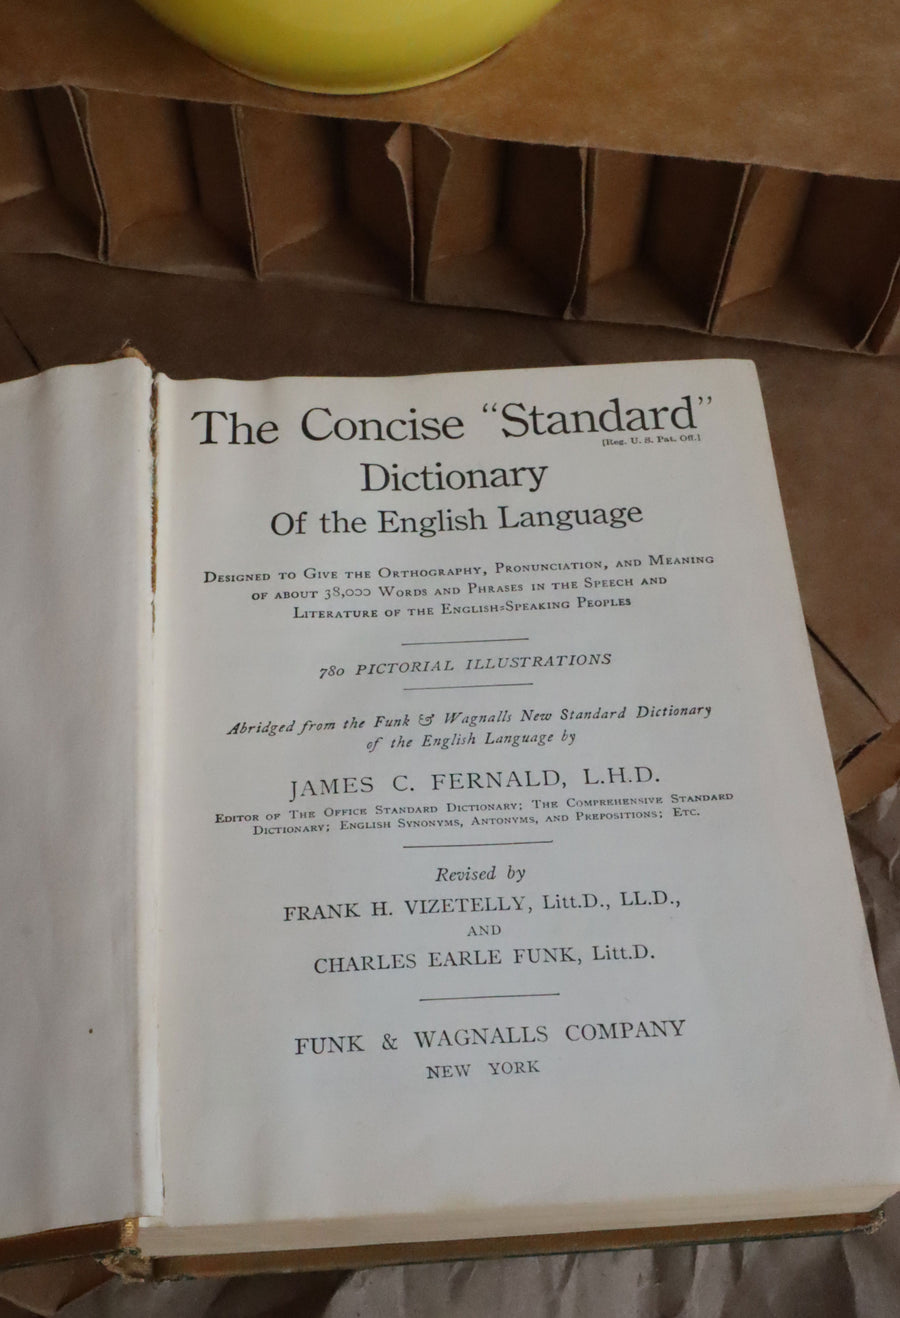 Vintage H.C. Book - The 'Concise" Standard Dictionary of the English Language